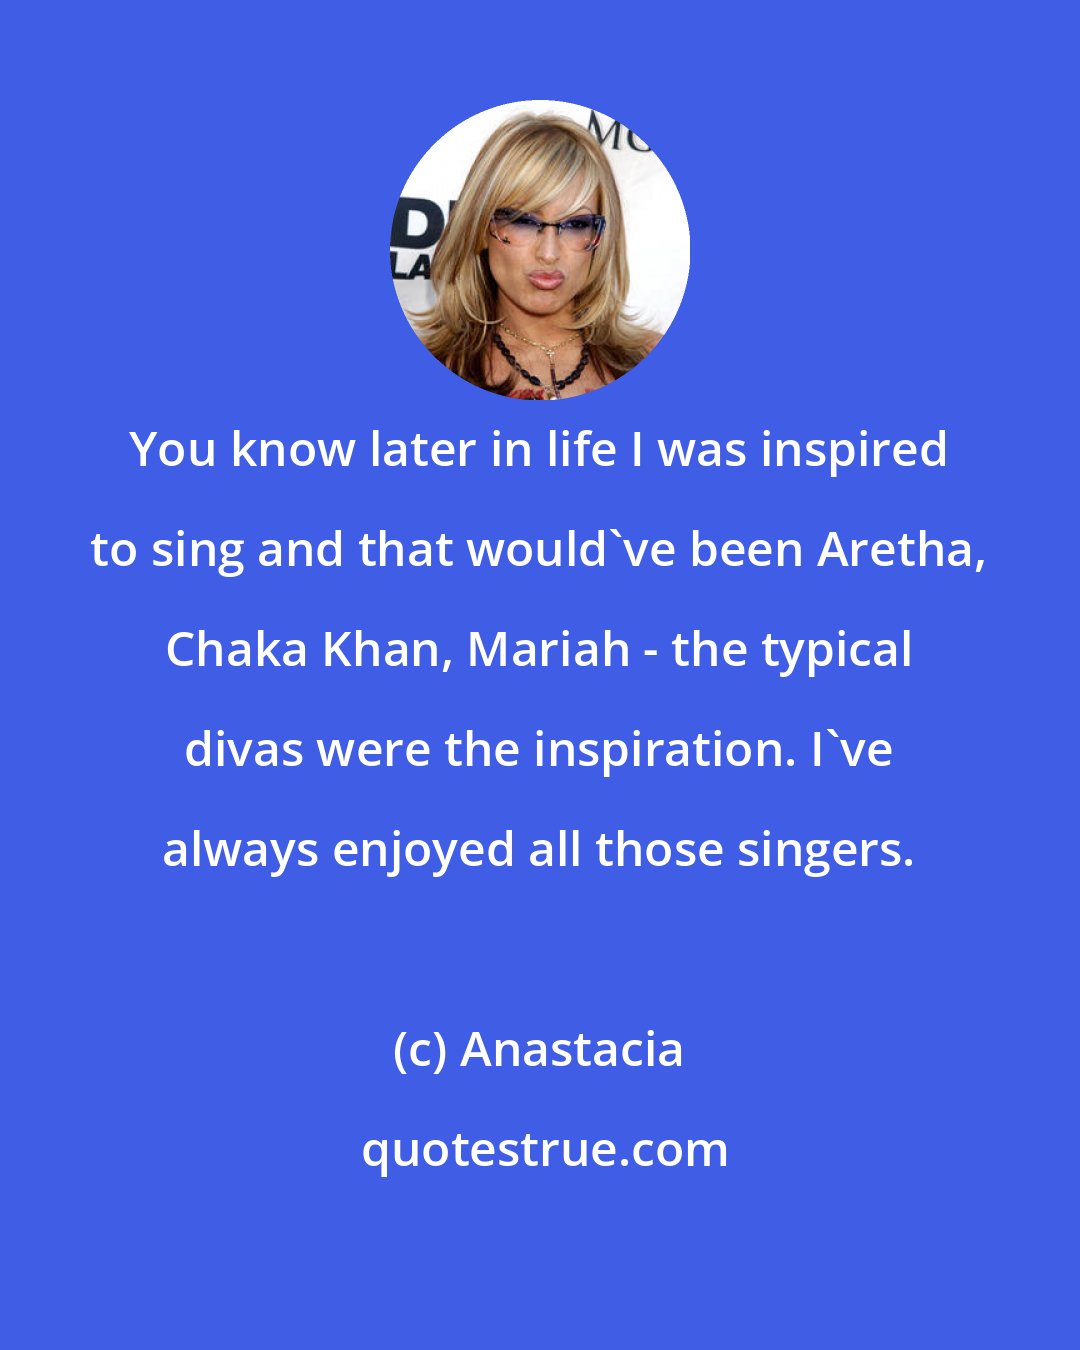 Anastacia: You know later in life I was inspired to sing and that would've been Aretha, Chaka Khan, Mariah - the typical divas were the inspiration. I've always enjoyed all those singers.